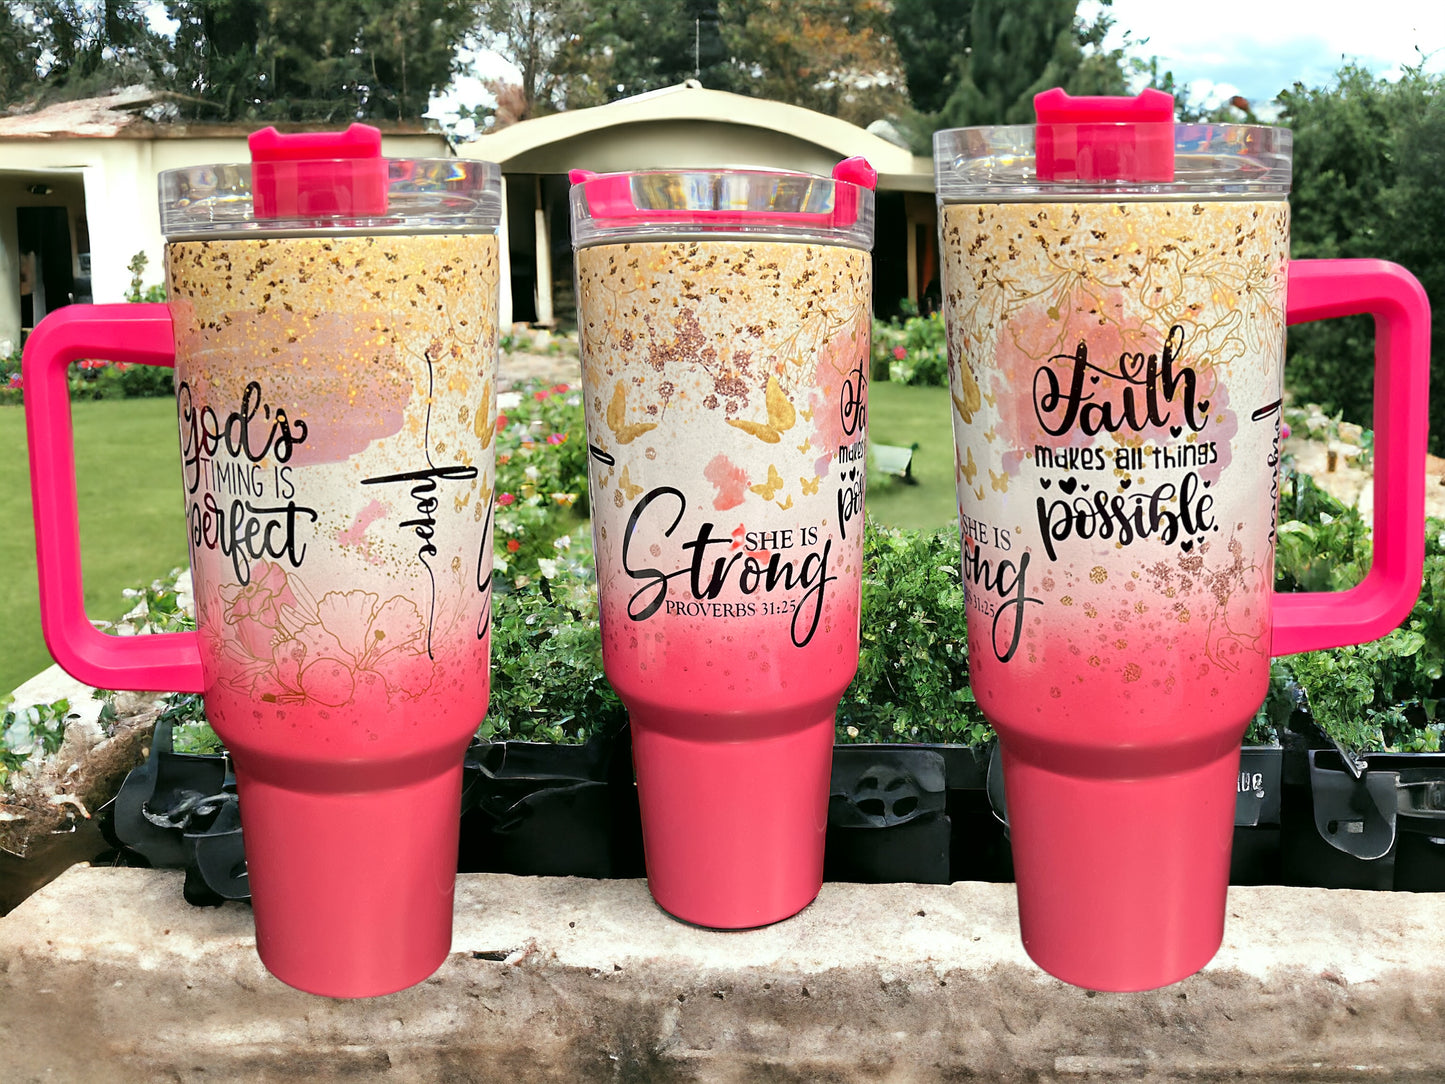 40oz Stanley Style Thirst Quencher Tumblers - she is strong proverbs. God‘s timing is perfect faith makes all things possible ￼